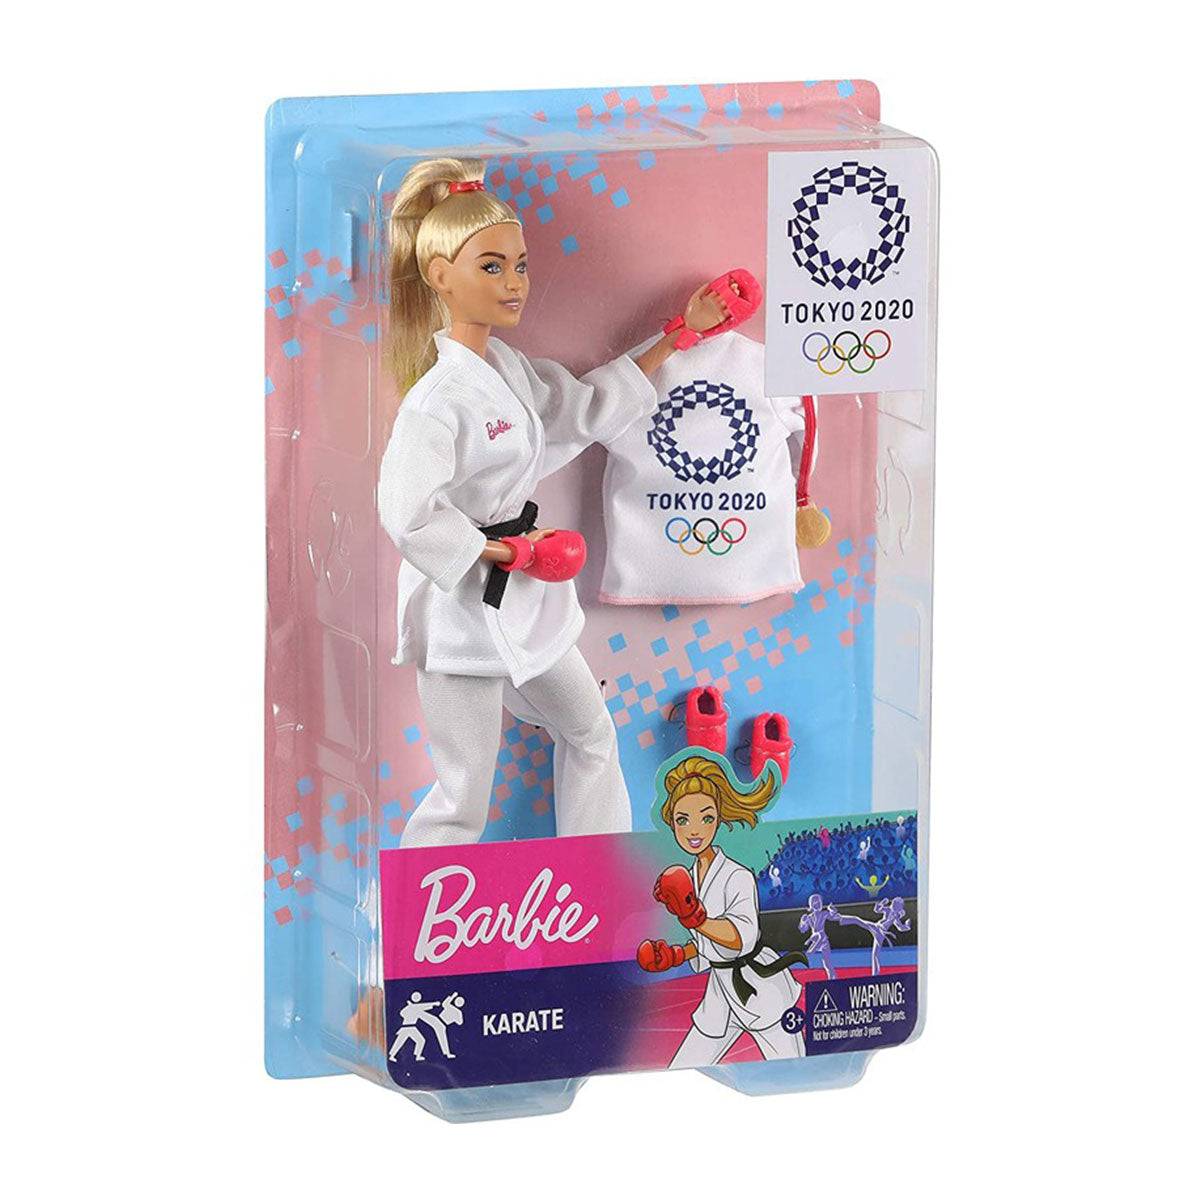 Barbie - Olympic Games Doll (Styles Vary - One Suppiled)